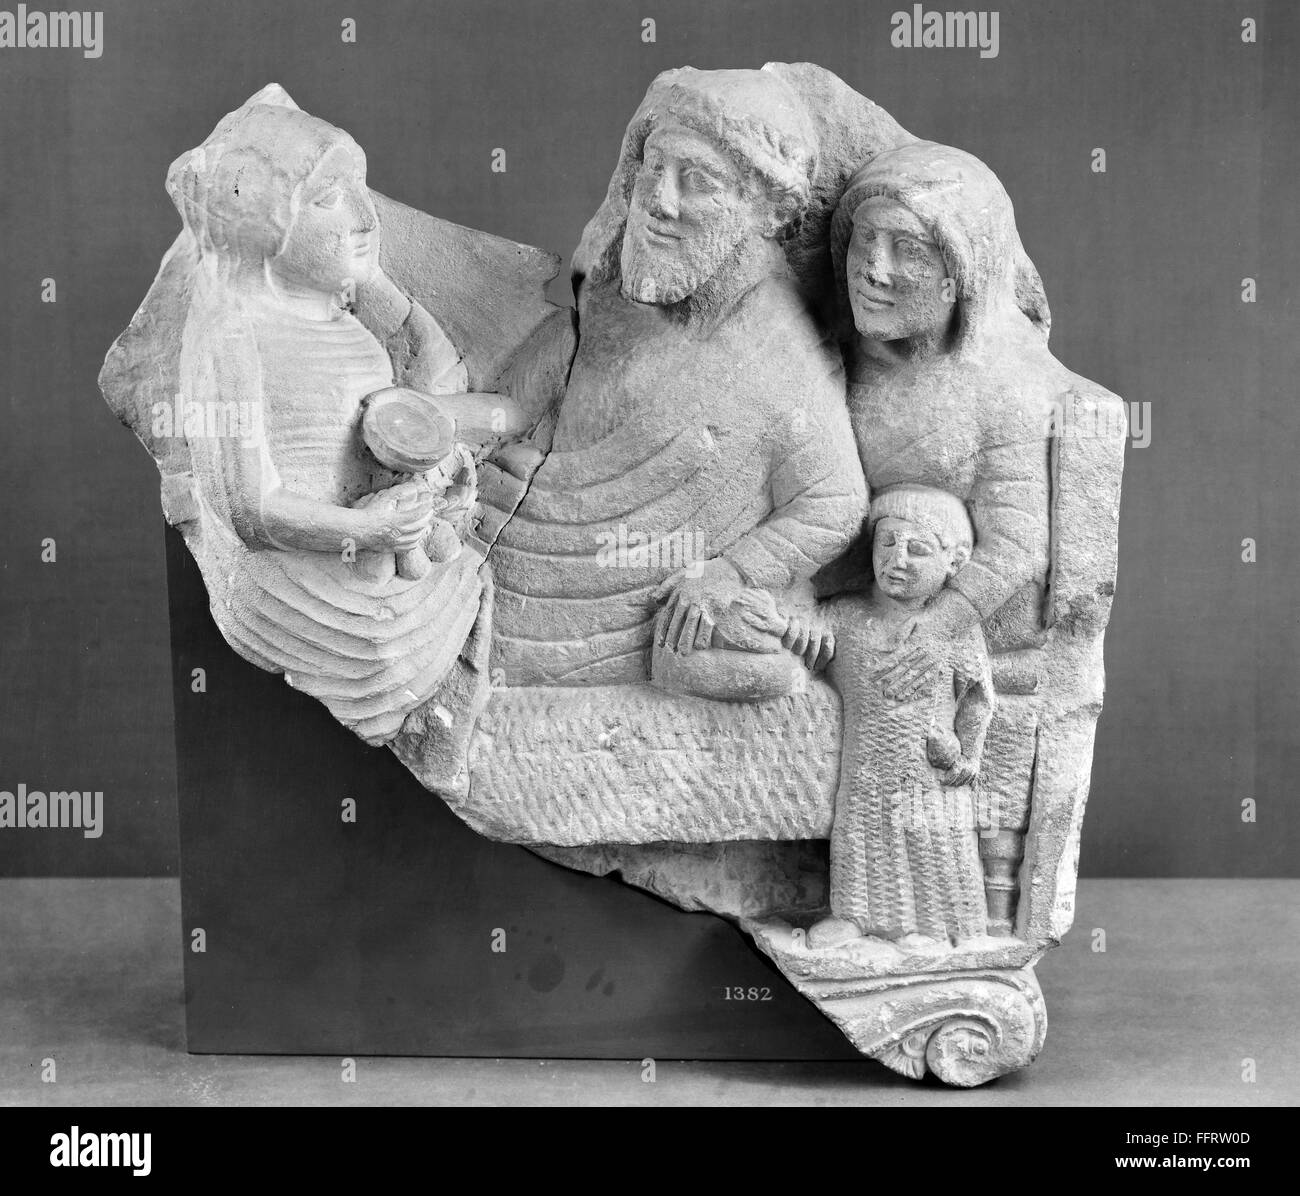 ANCIENT GREECE: FAMILY./nA family at a banquet. Tombstone. Limestone, Cypress, 4th century. Stock Photo